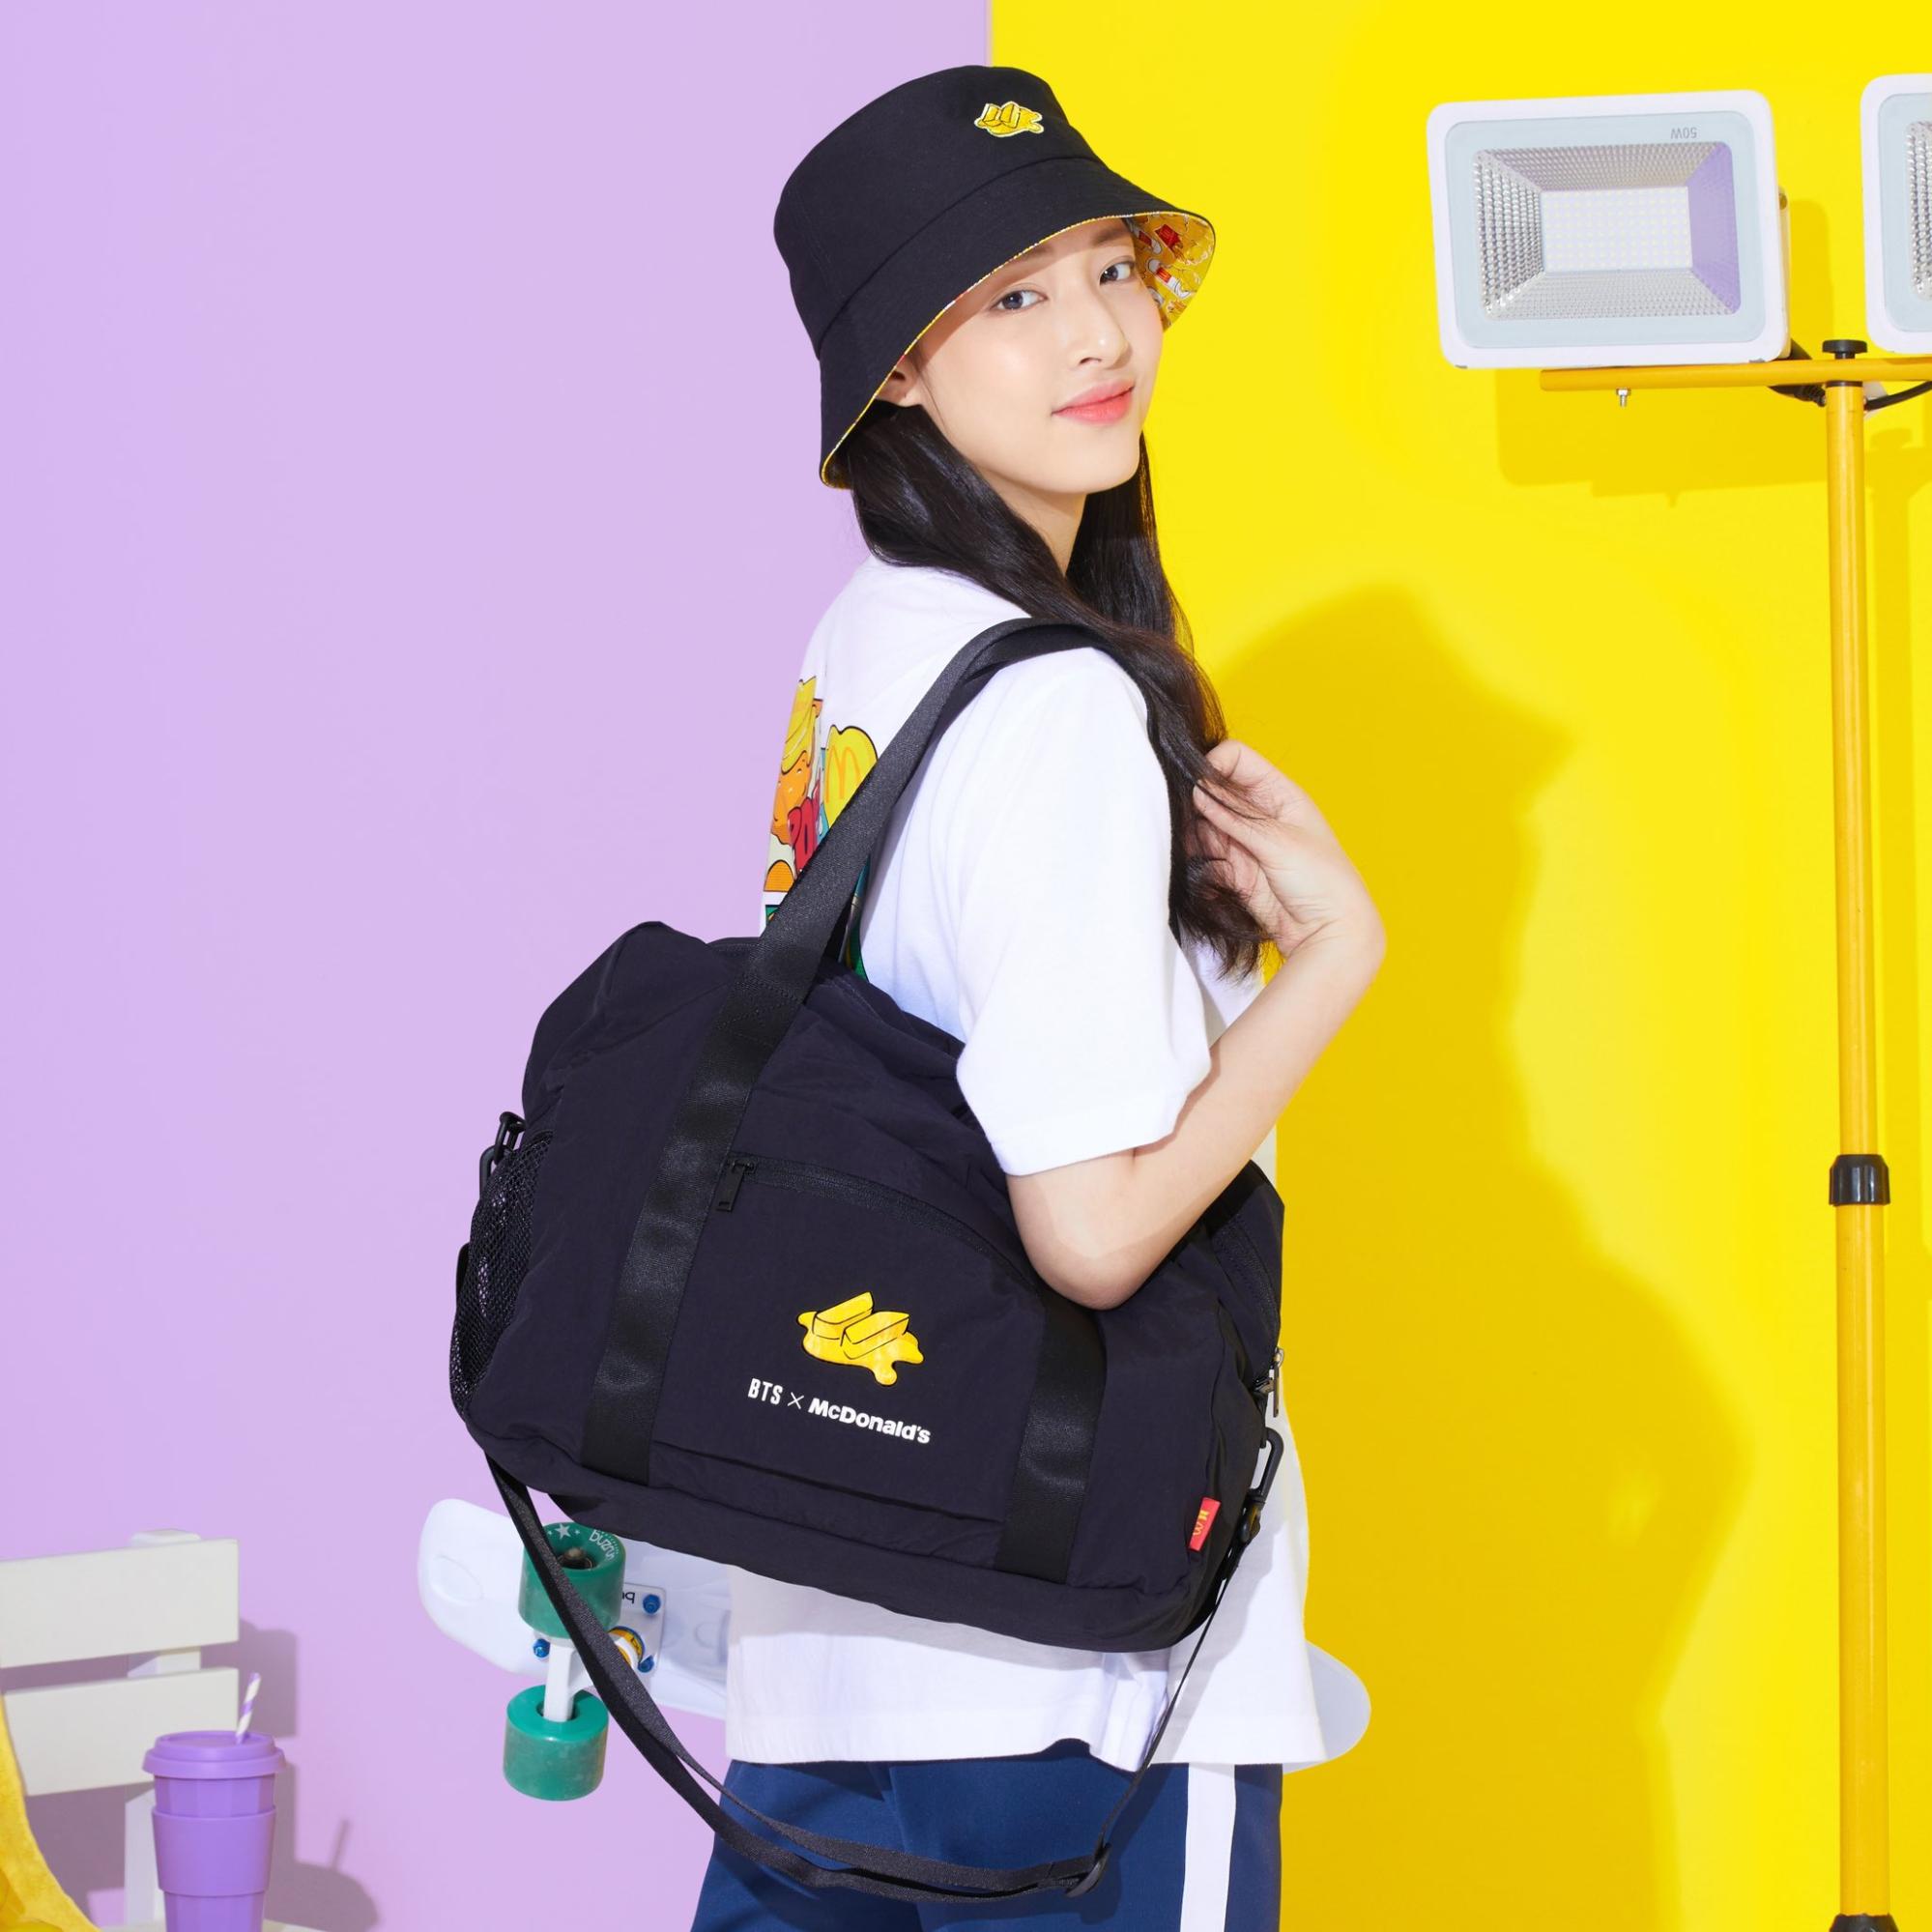 bts mcdonald collection - bucket hat and bag